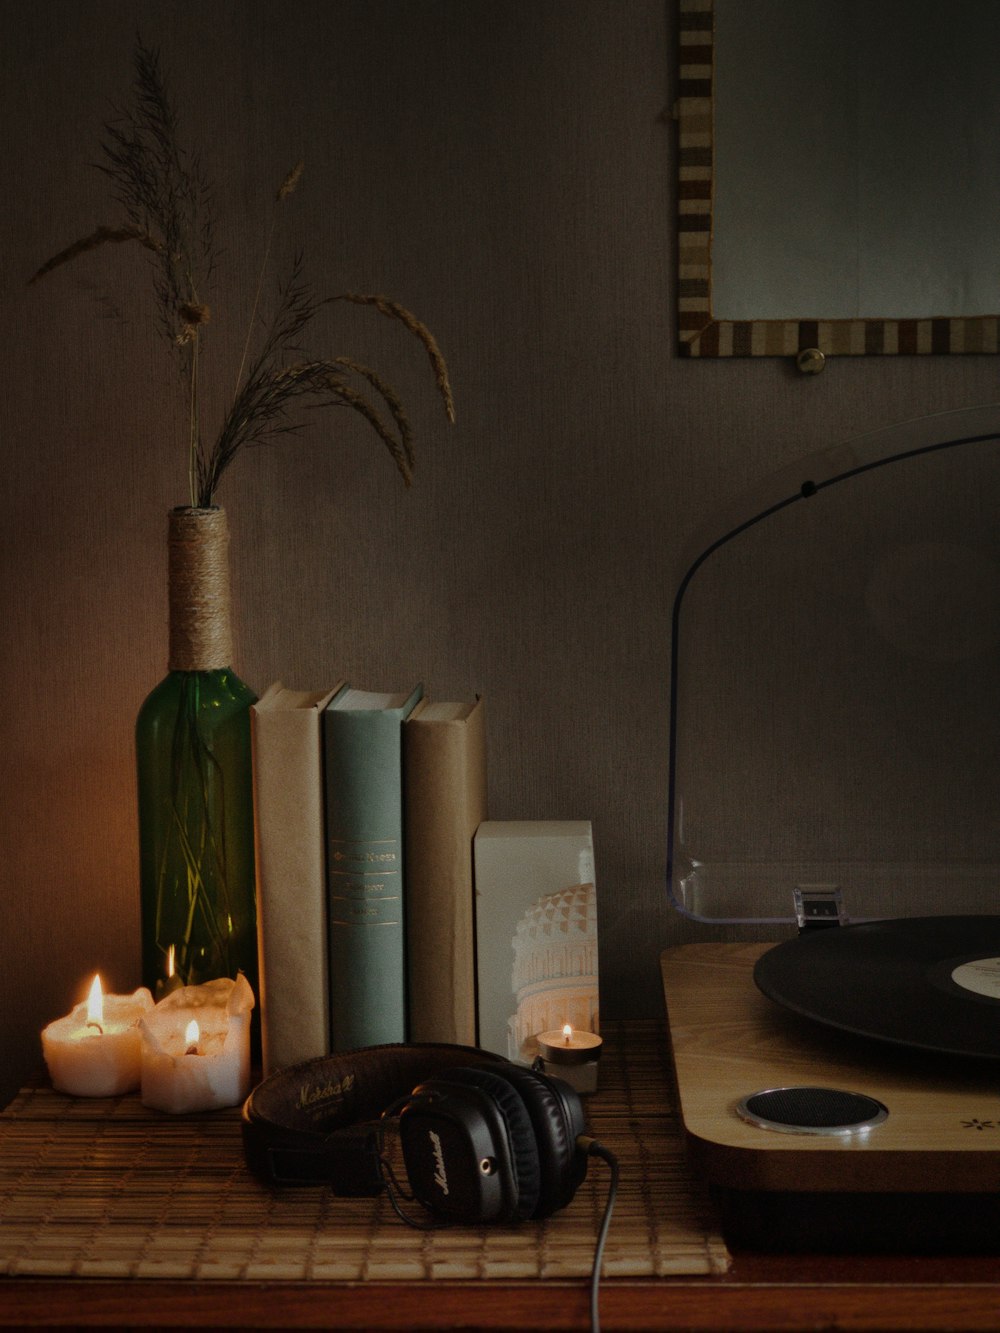 a record player, headphones, candles, and a vase on a table